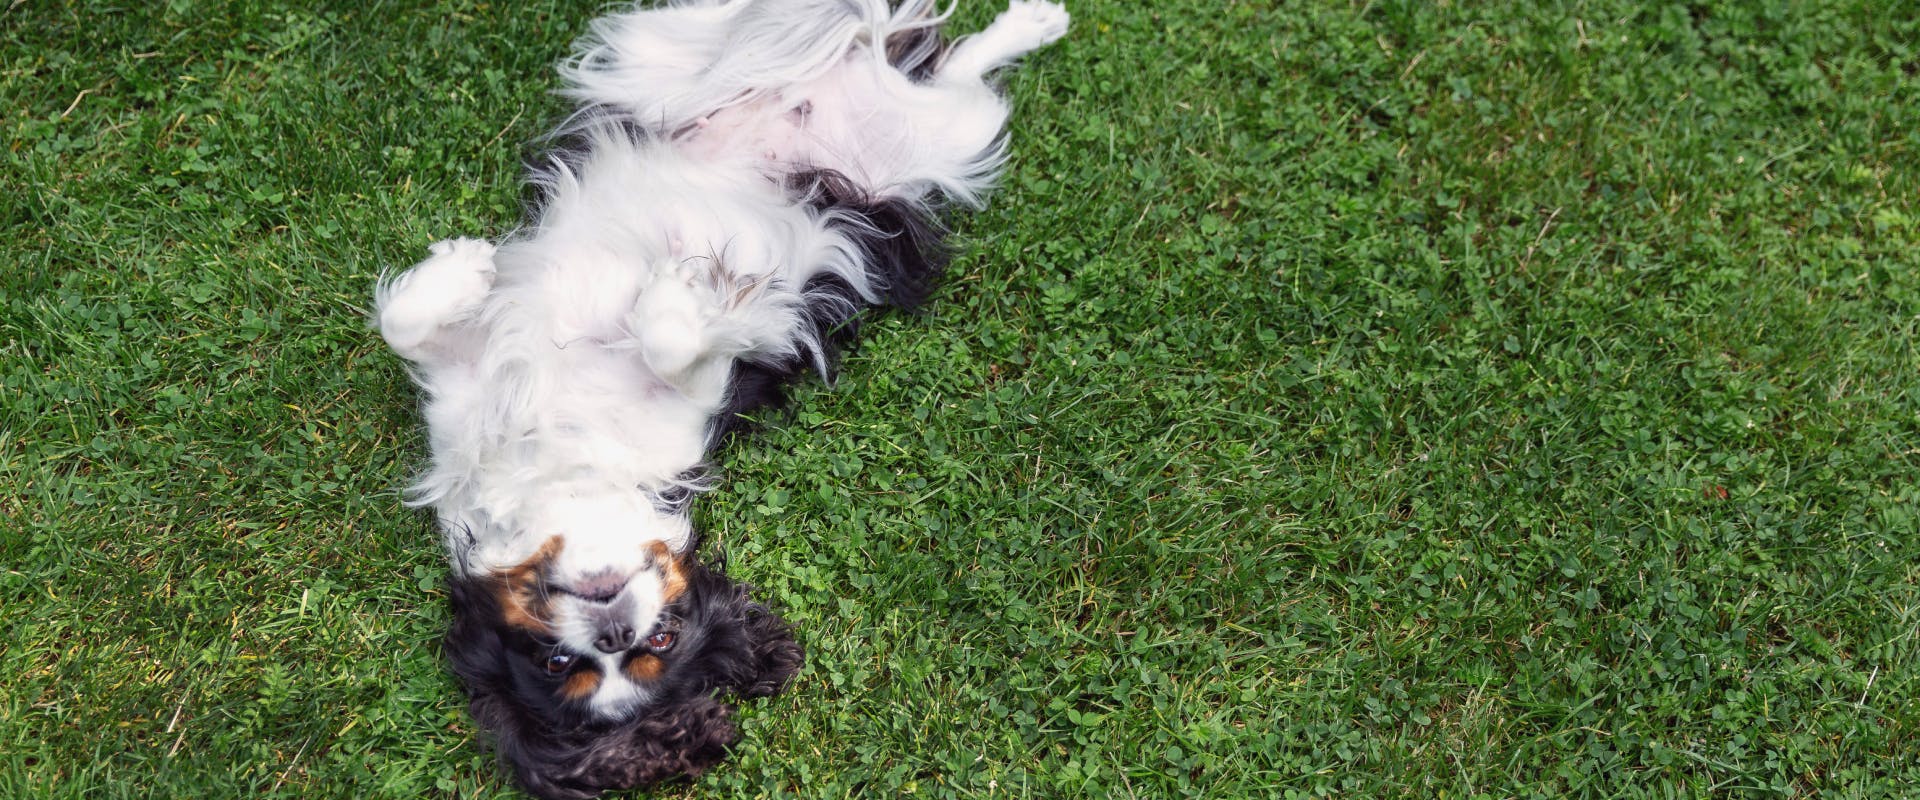 A dog showing belly while lying on some grass.